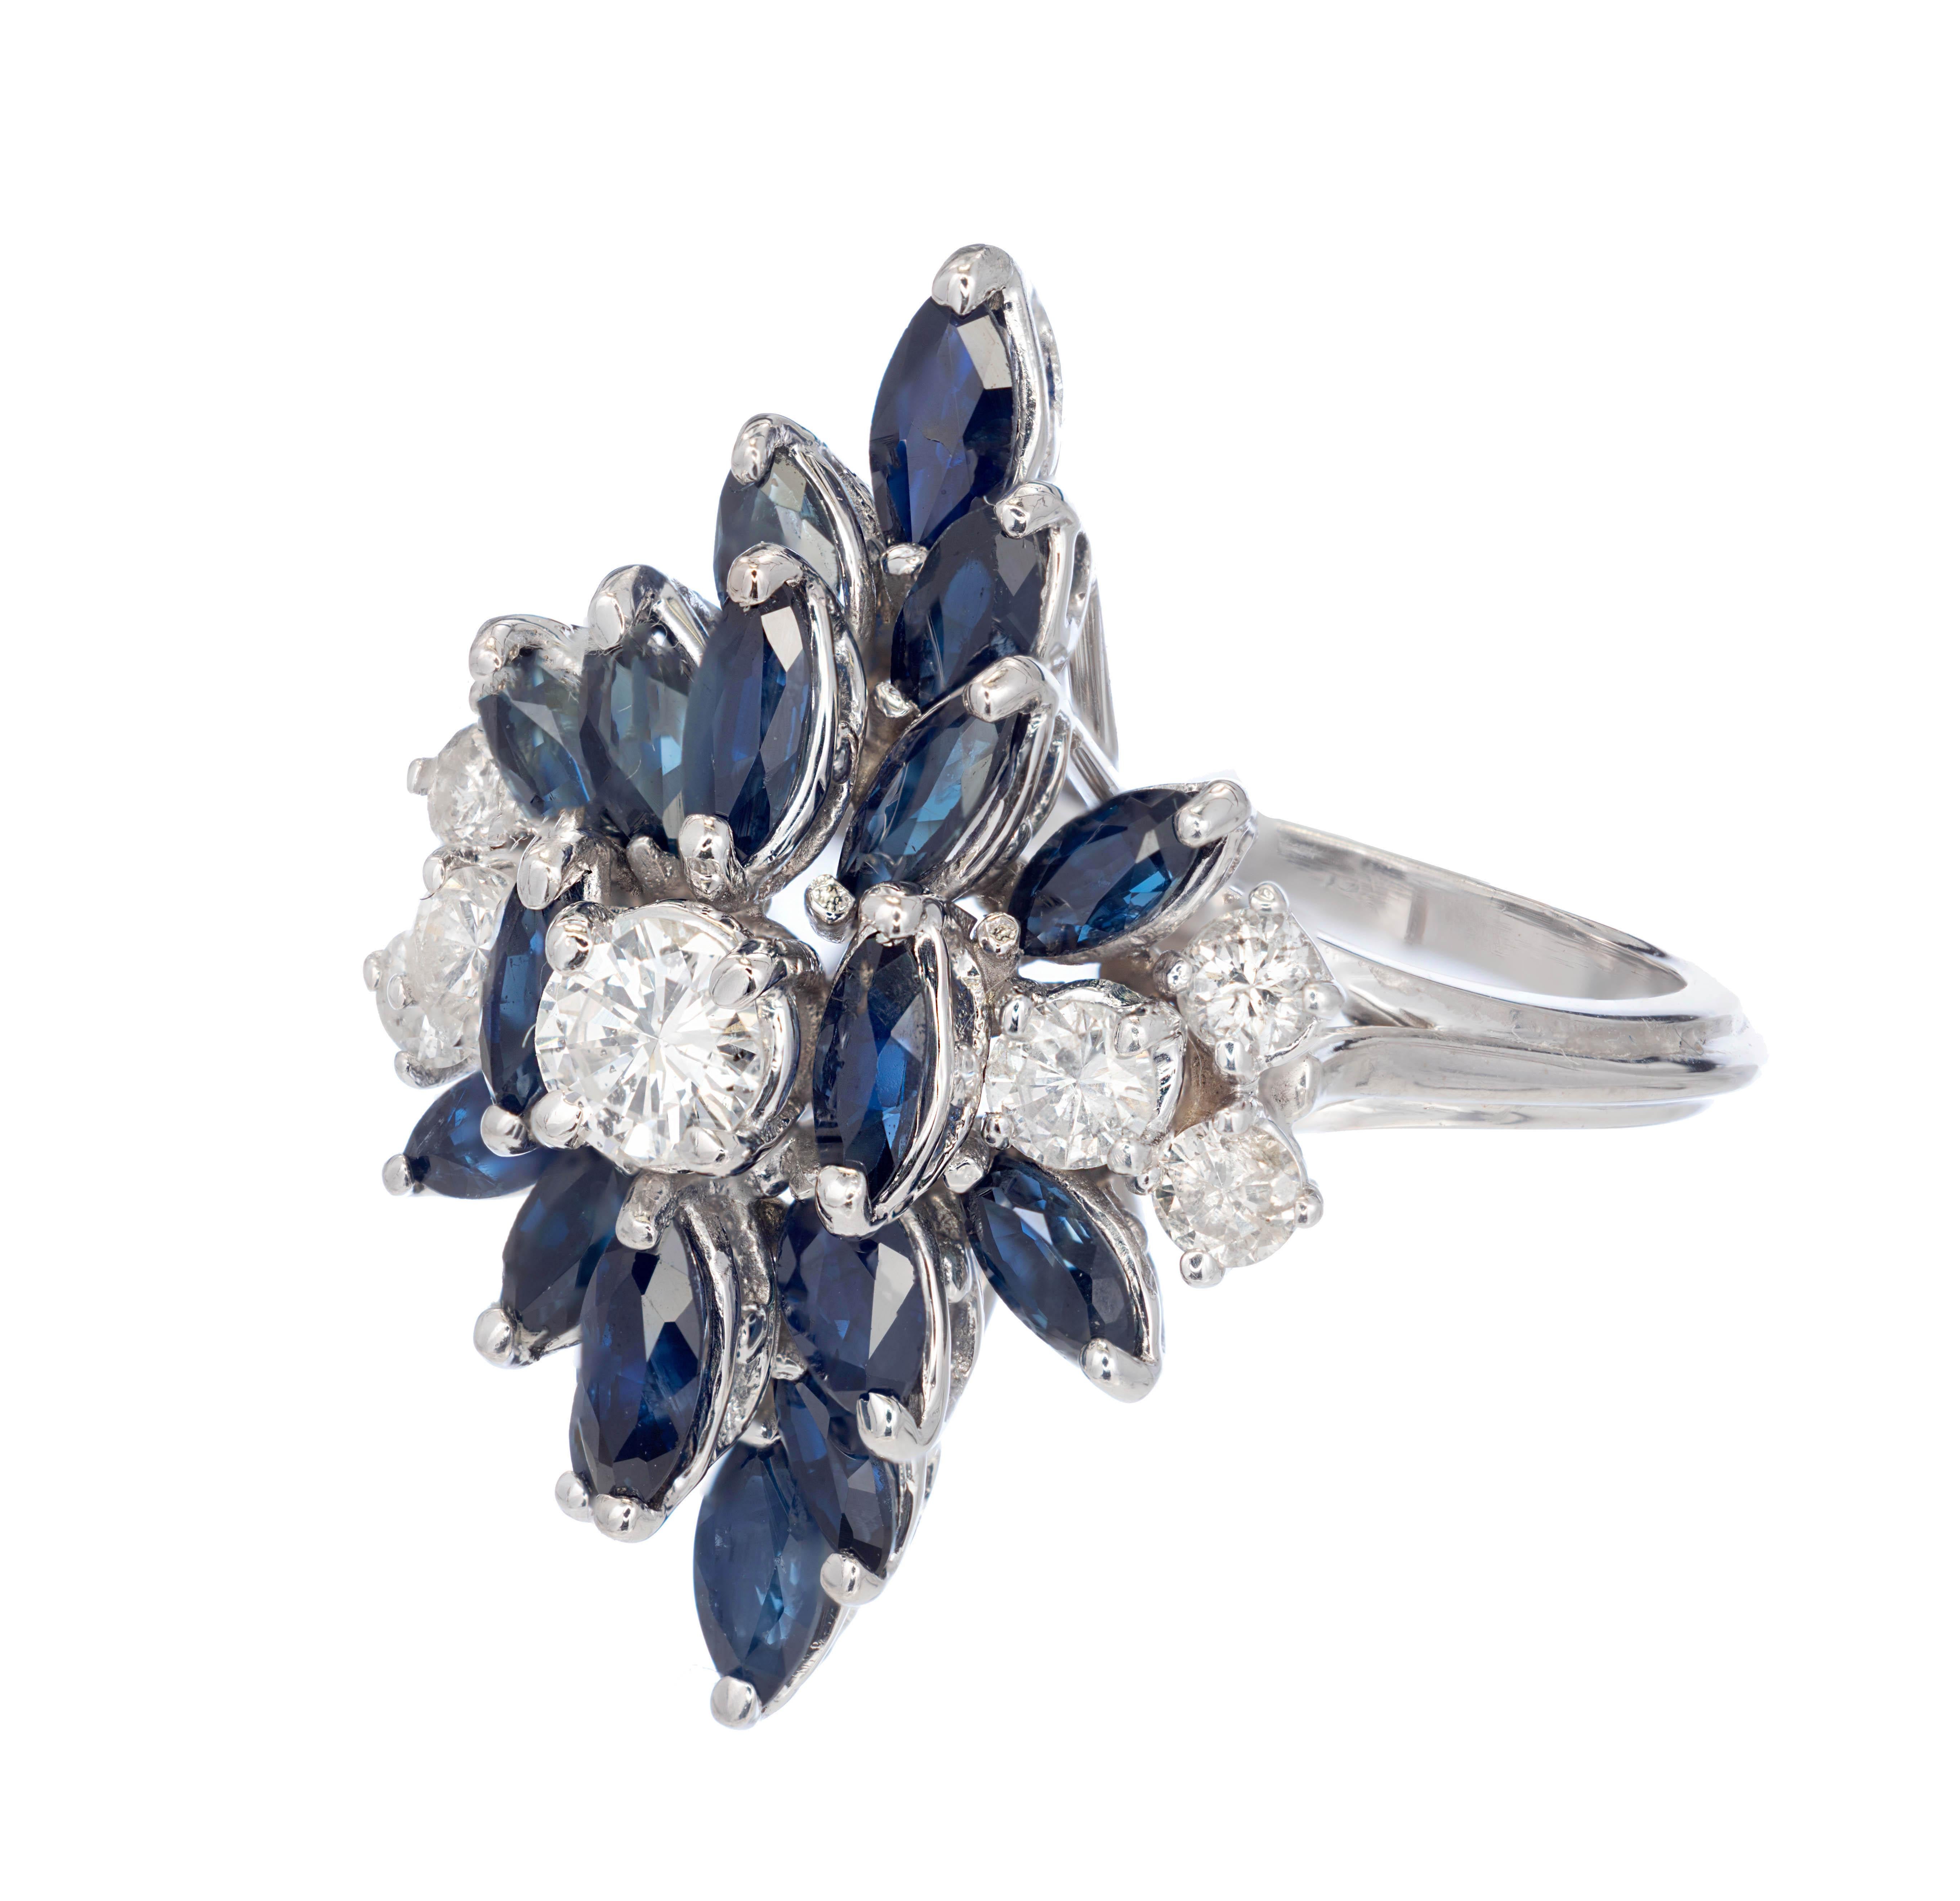 1960's Sapphire and diamond starburst cluster cocktail ring. Round brilliant cut center diamond with sprays of marquise shaped sapphires above and below with additional round brilliant cut accent diamonds to each side in a 14k white gold setting. A